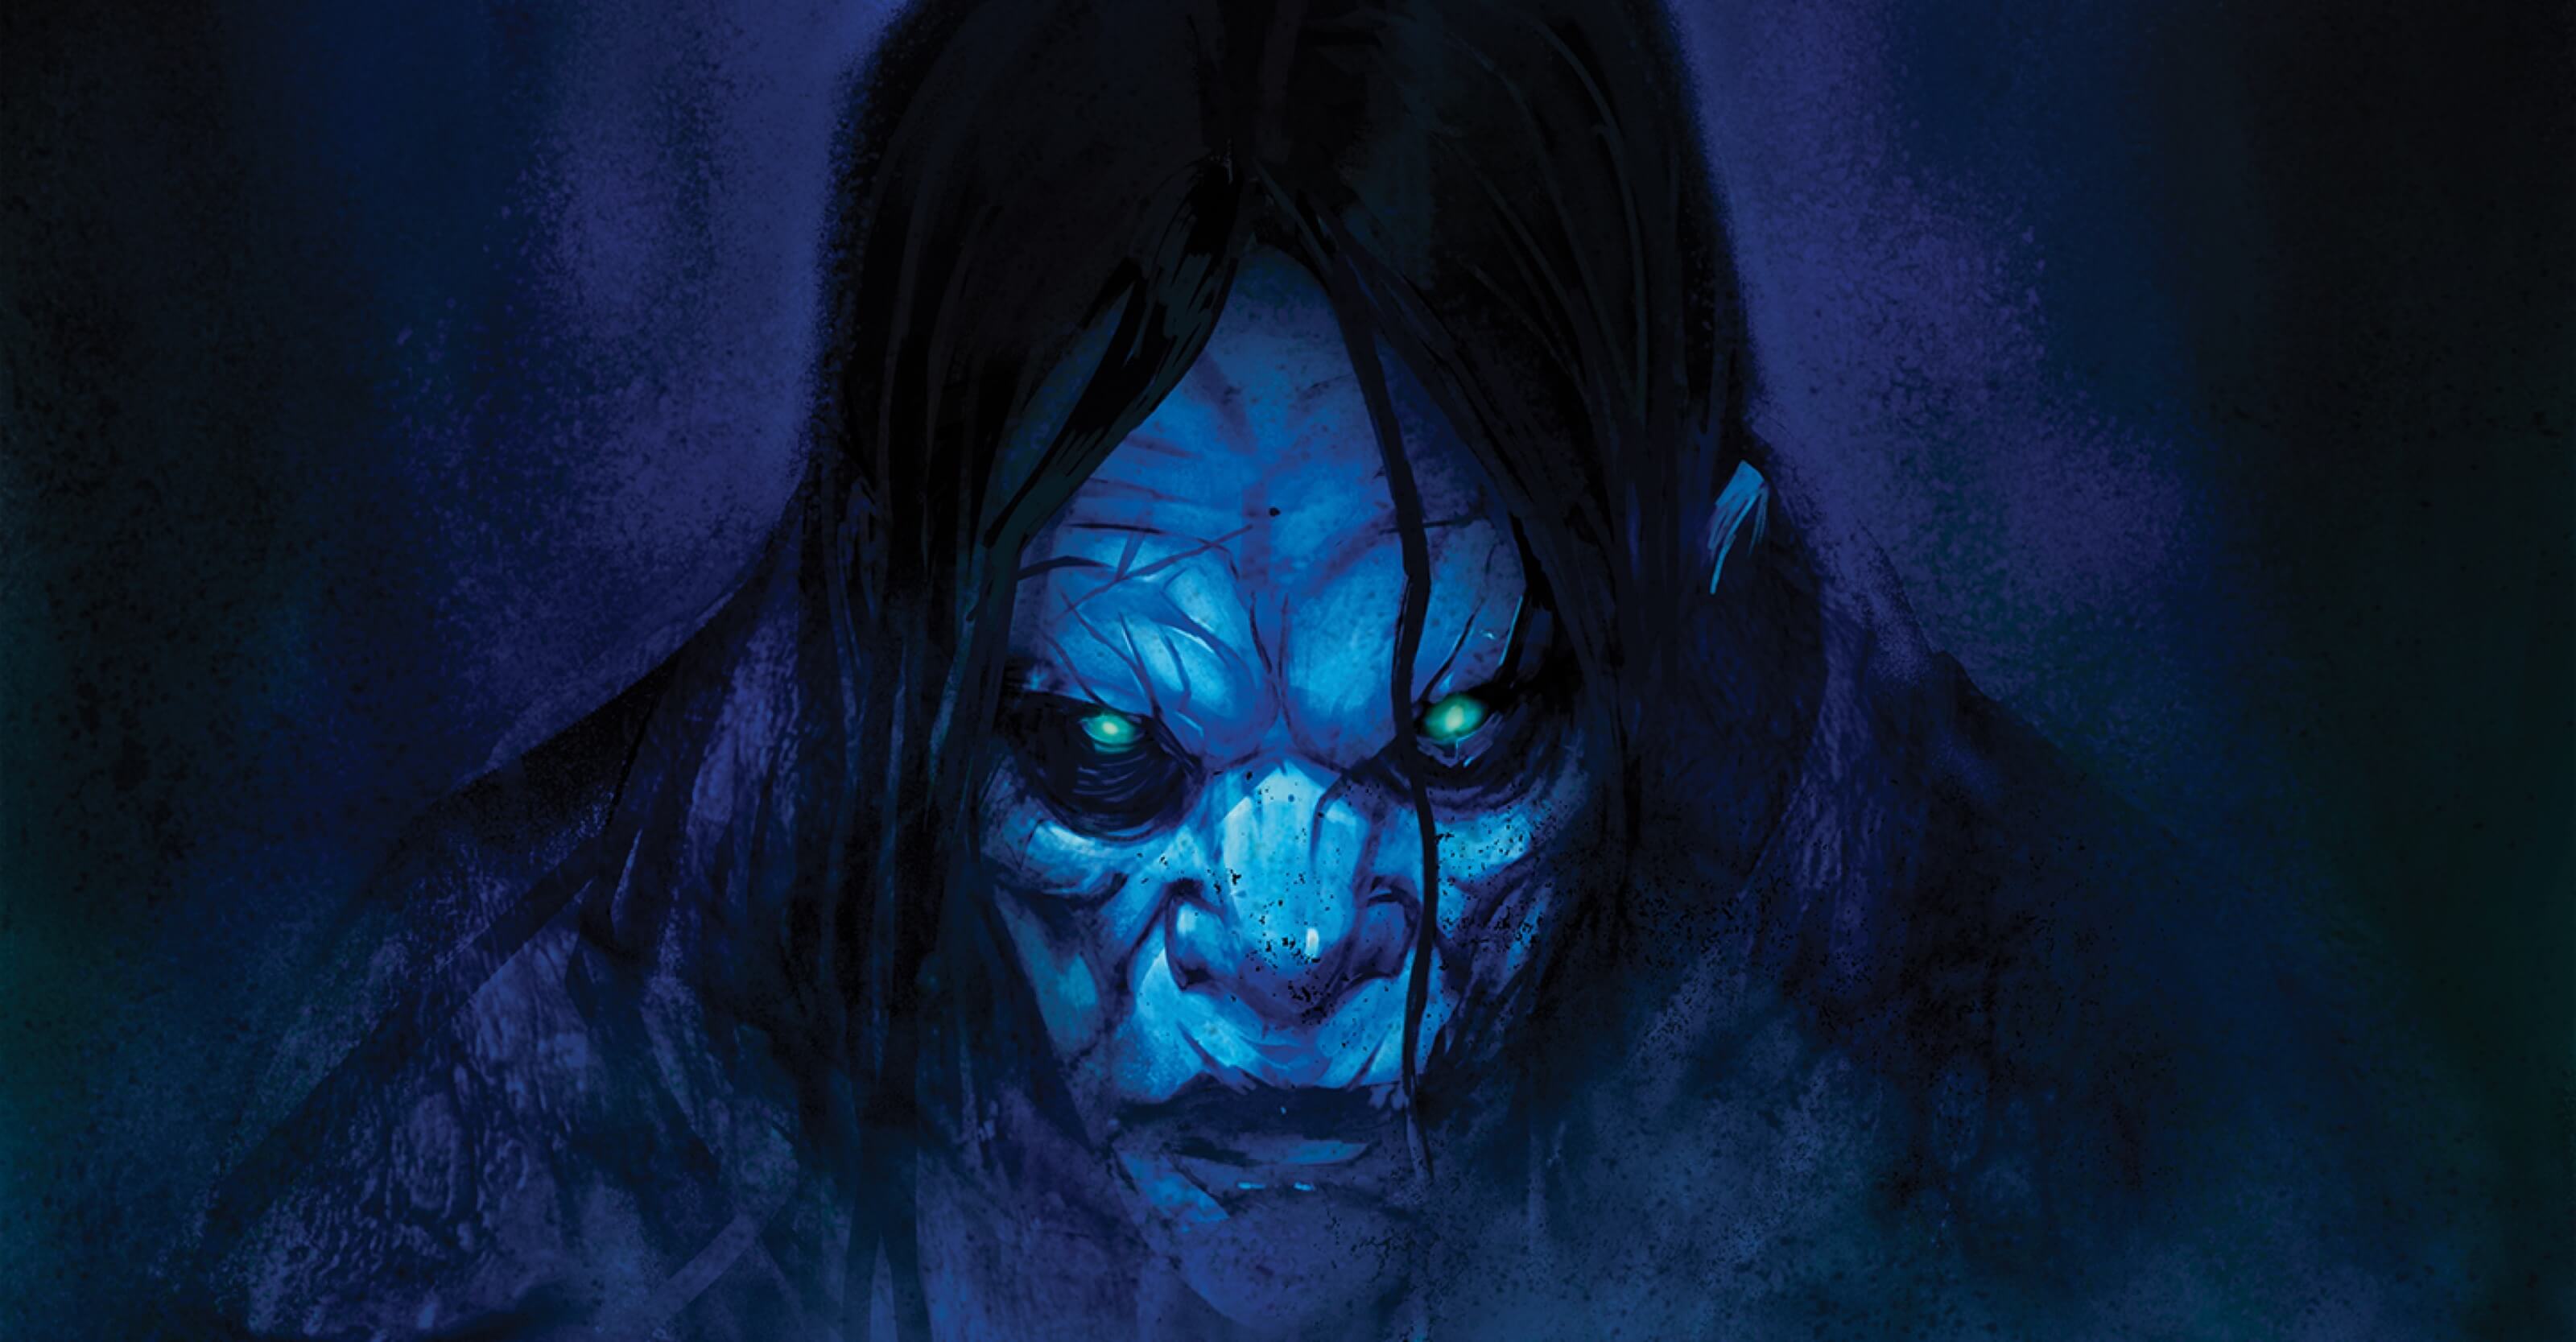 30 Days of Night Creator Steve Niles Returns to IDW with Brooding, Blood-Soaked Horror Miniseries Brynmore